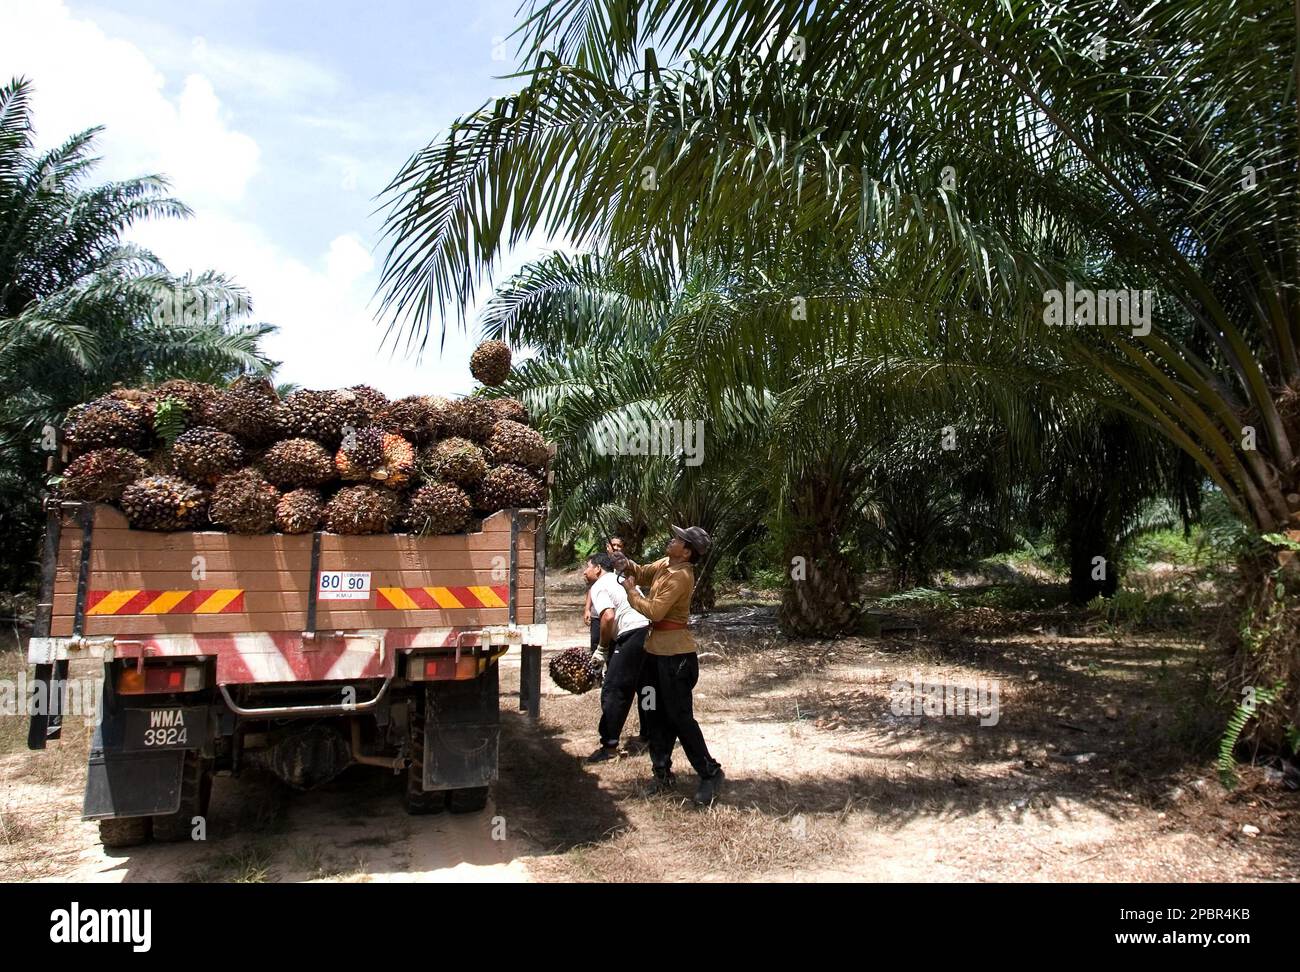 ** FILE ** A worker loads palm oil fruits onto a lorry at a palm oil plantation in Sepang, Malaysia, in this March 13, 2007 file photo. Palm oil, once seen as a cheap and environmentally friendly alternative to petroleum for power plants, is being looked at again. Environmentalists have long warned that many plantations in Indonesia and Malaysia were planted on clear-cut rain forests, threatening the home of endangered animals like the orangutan and the Sumatran tiger. Now, some electricity companies have put plans on hold to switch to palm oil fuel. A report late last year claims the environm Foto Stock